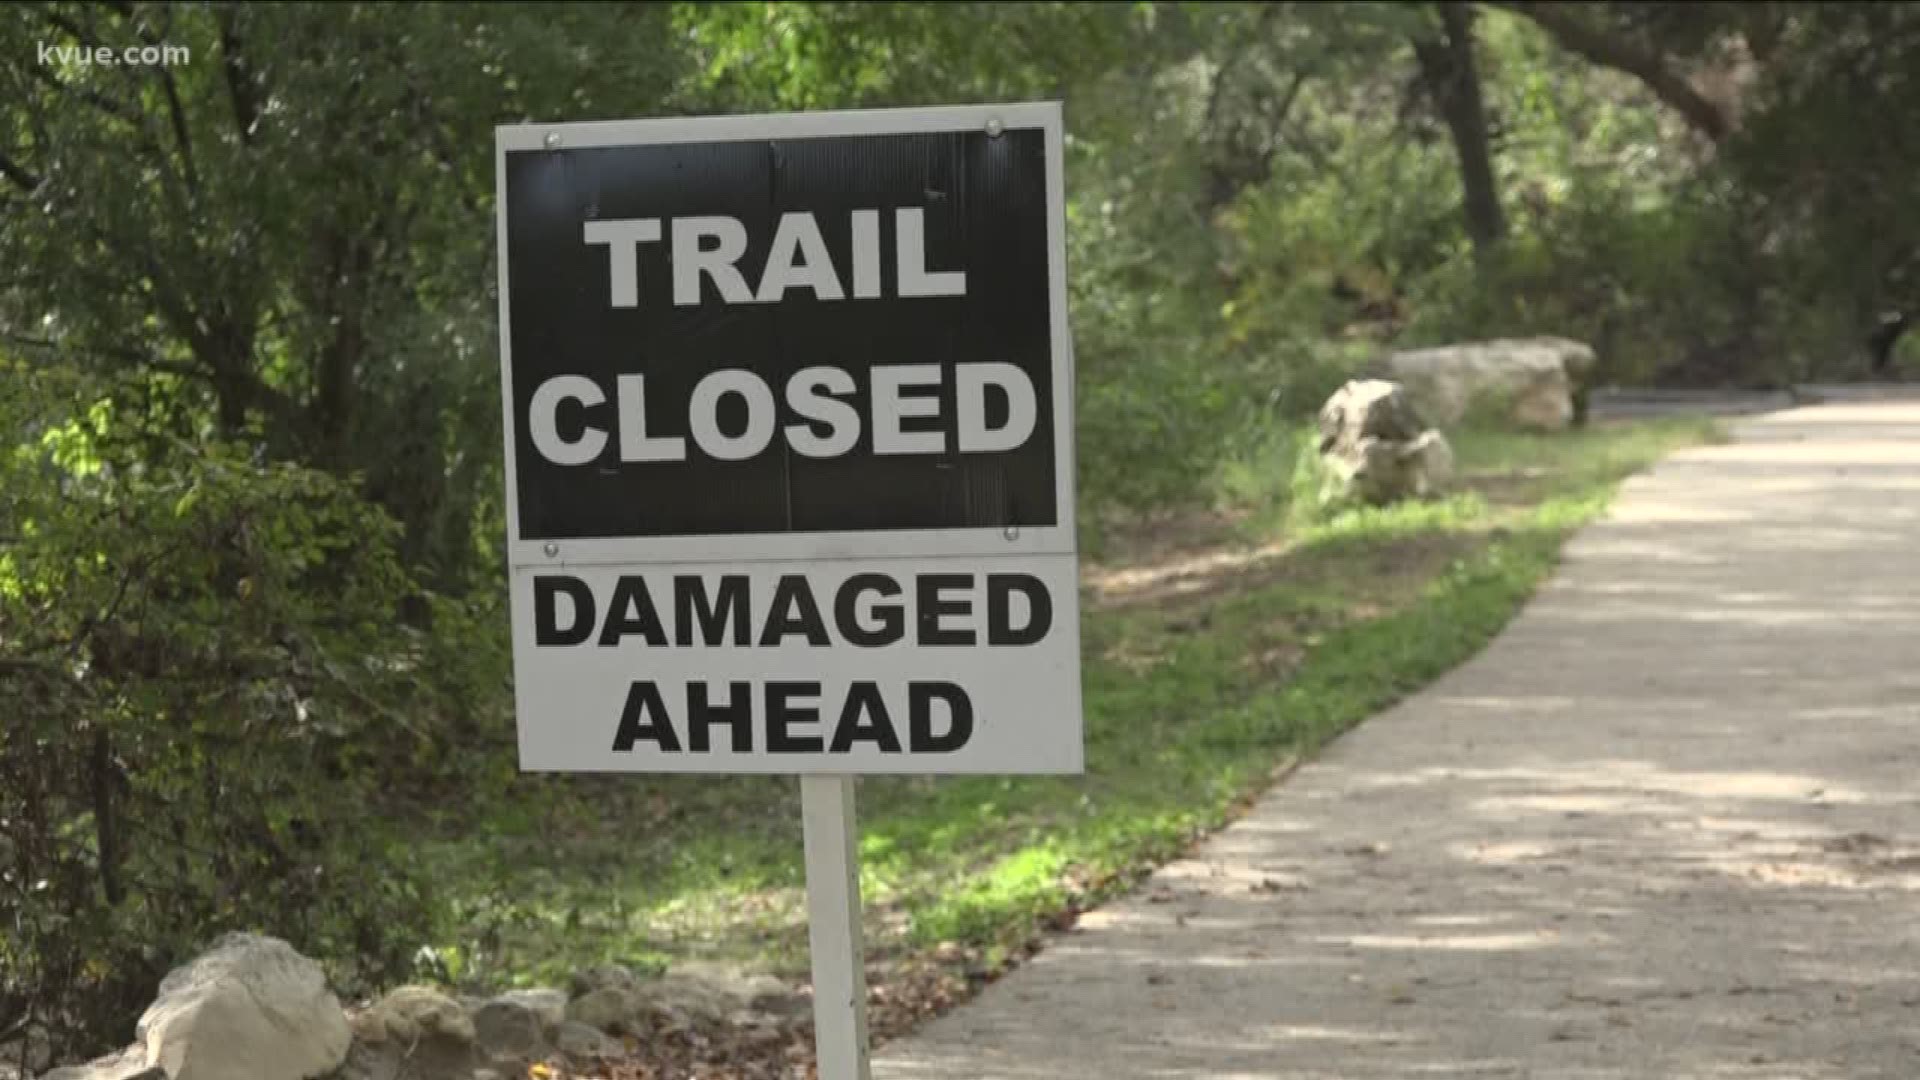 More than five months after a landslide damaged Shoal Creek, the trail off of Lamar Boulevard in Austin remains closed.